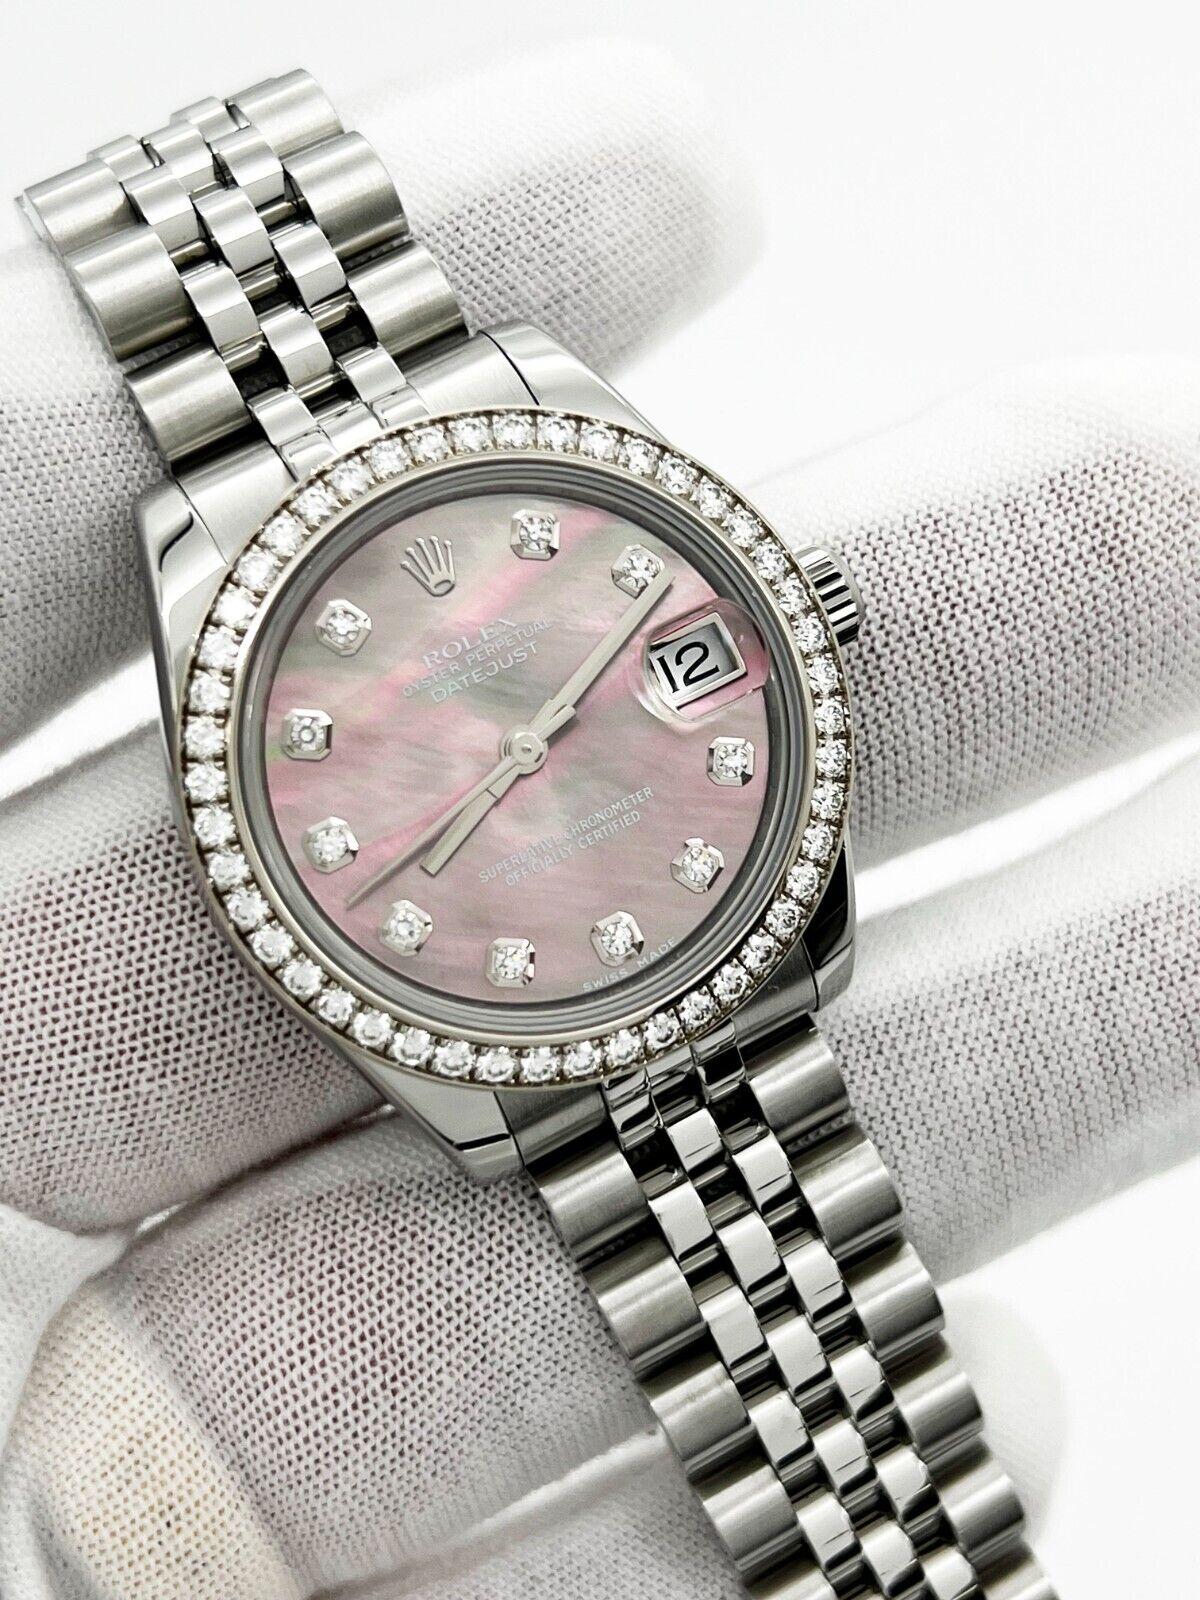 Style Number: 178384

Serial: 99H2F***

Year: 2014
 
Model: Datejust 
 
Case Material: Stainless Steel
 
Band: Stainless Steel
 
Bezel: Original Factory Diamond Bezel 
 
Dial: Original Factory Tahitian MOP Diamond Dial
 
Face: Sapphire Crystal 
